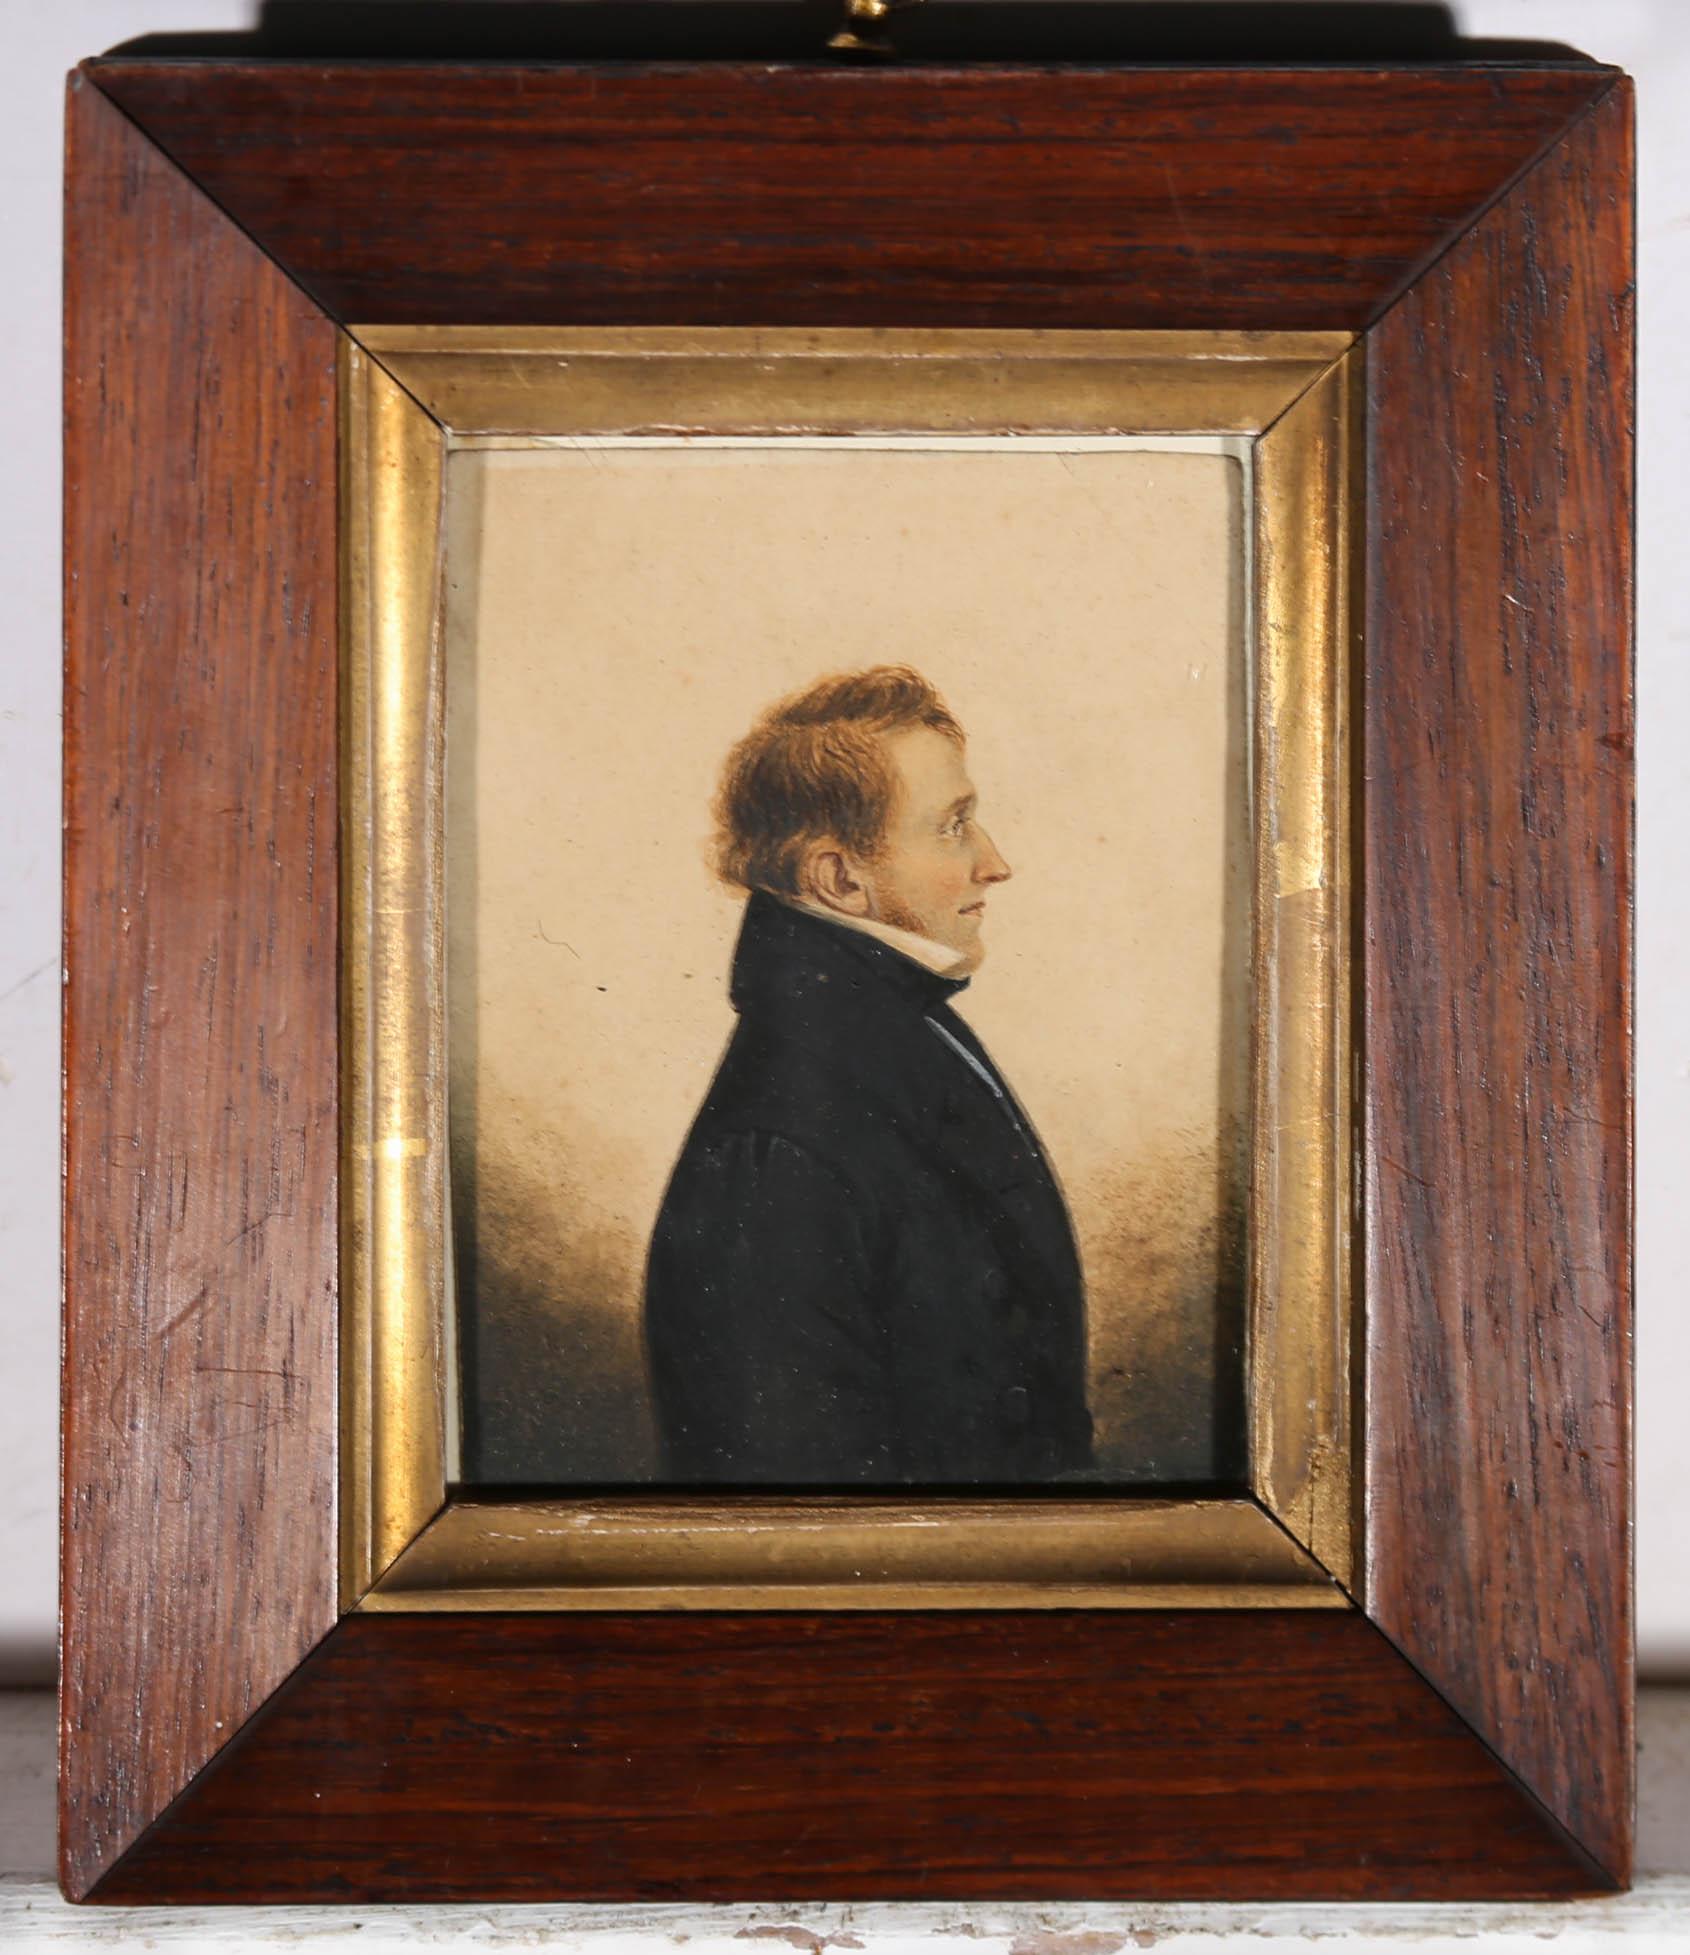 An exquisite mid 19th Century miniature portrait in watercolour, showing a handsome man in profile, with an elegantly pointed nose and a fine suit with crisp white collar. The artist's use of minuscule individual brush strokes to build up tone and